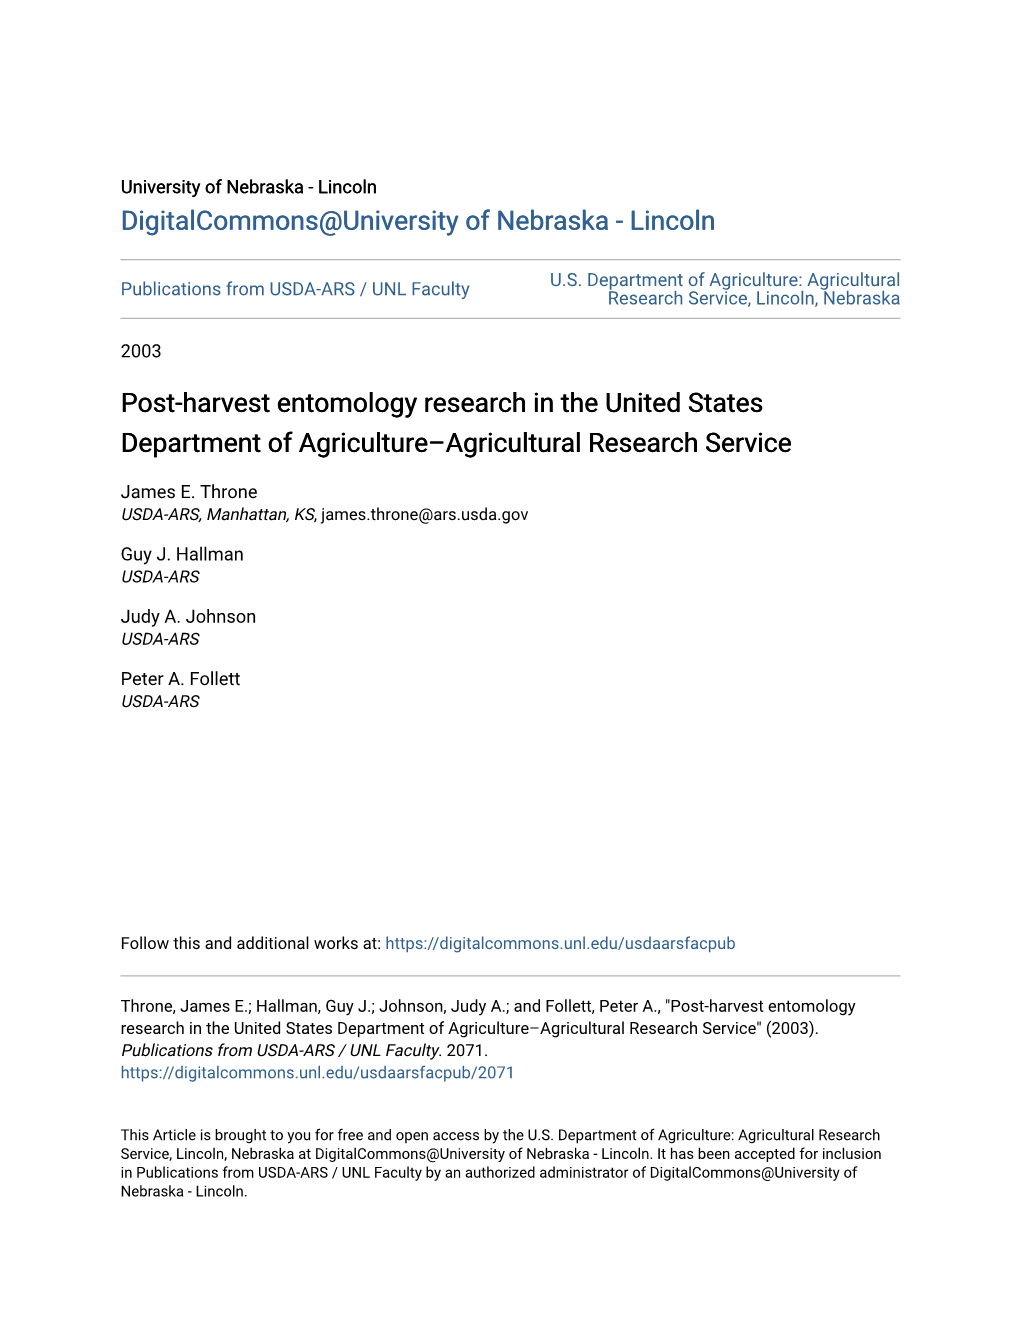 Post-Harvest Entomology Research in the United States Department of Agriculture–Agricultural Research Service